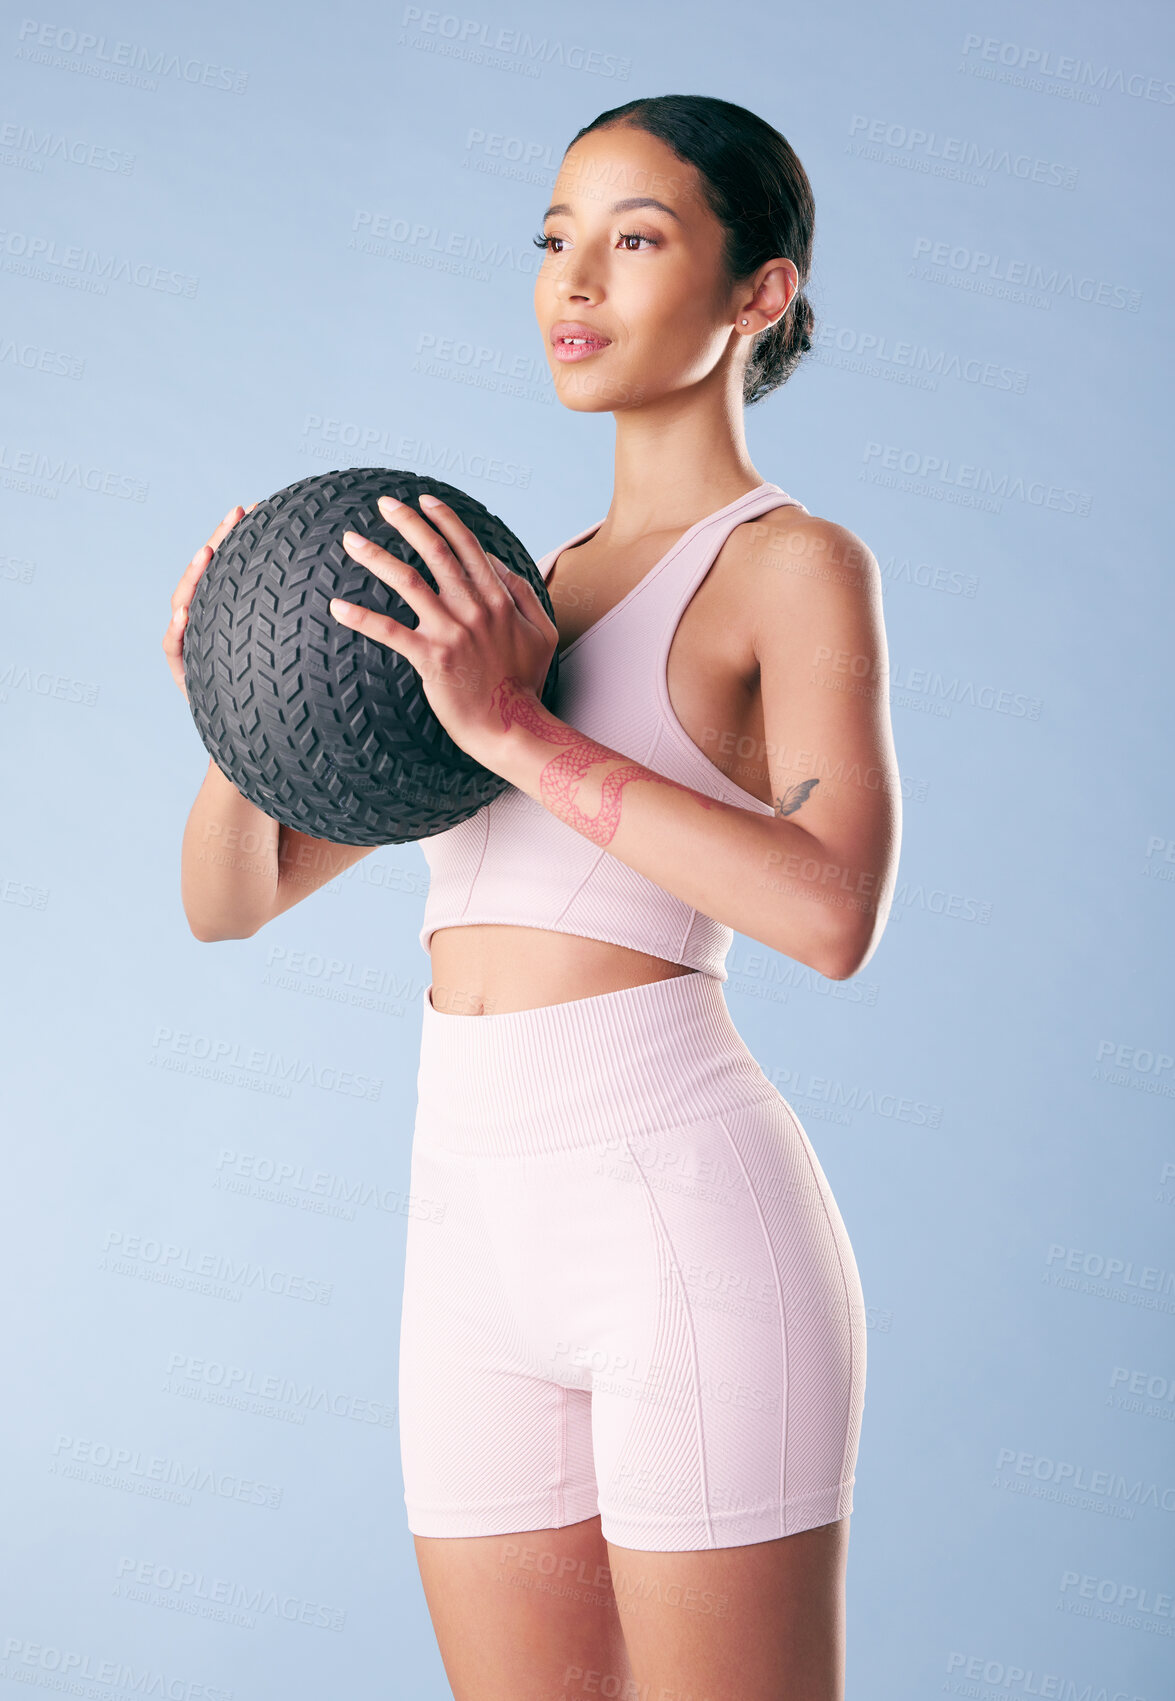 Buy stock photo Mixed race fitness woman standing with a medicine ball or slam ball in studio against a blue background. Beautiful young hispanic female athlete exercising or working out. Health and fitness